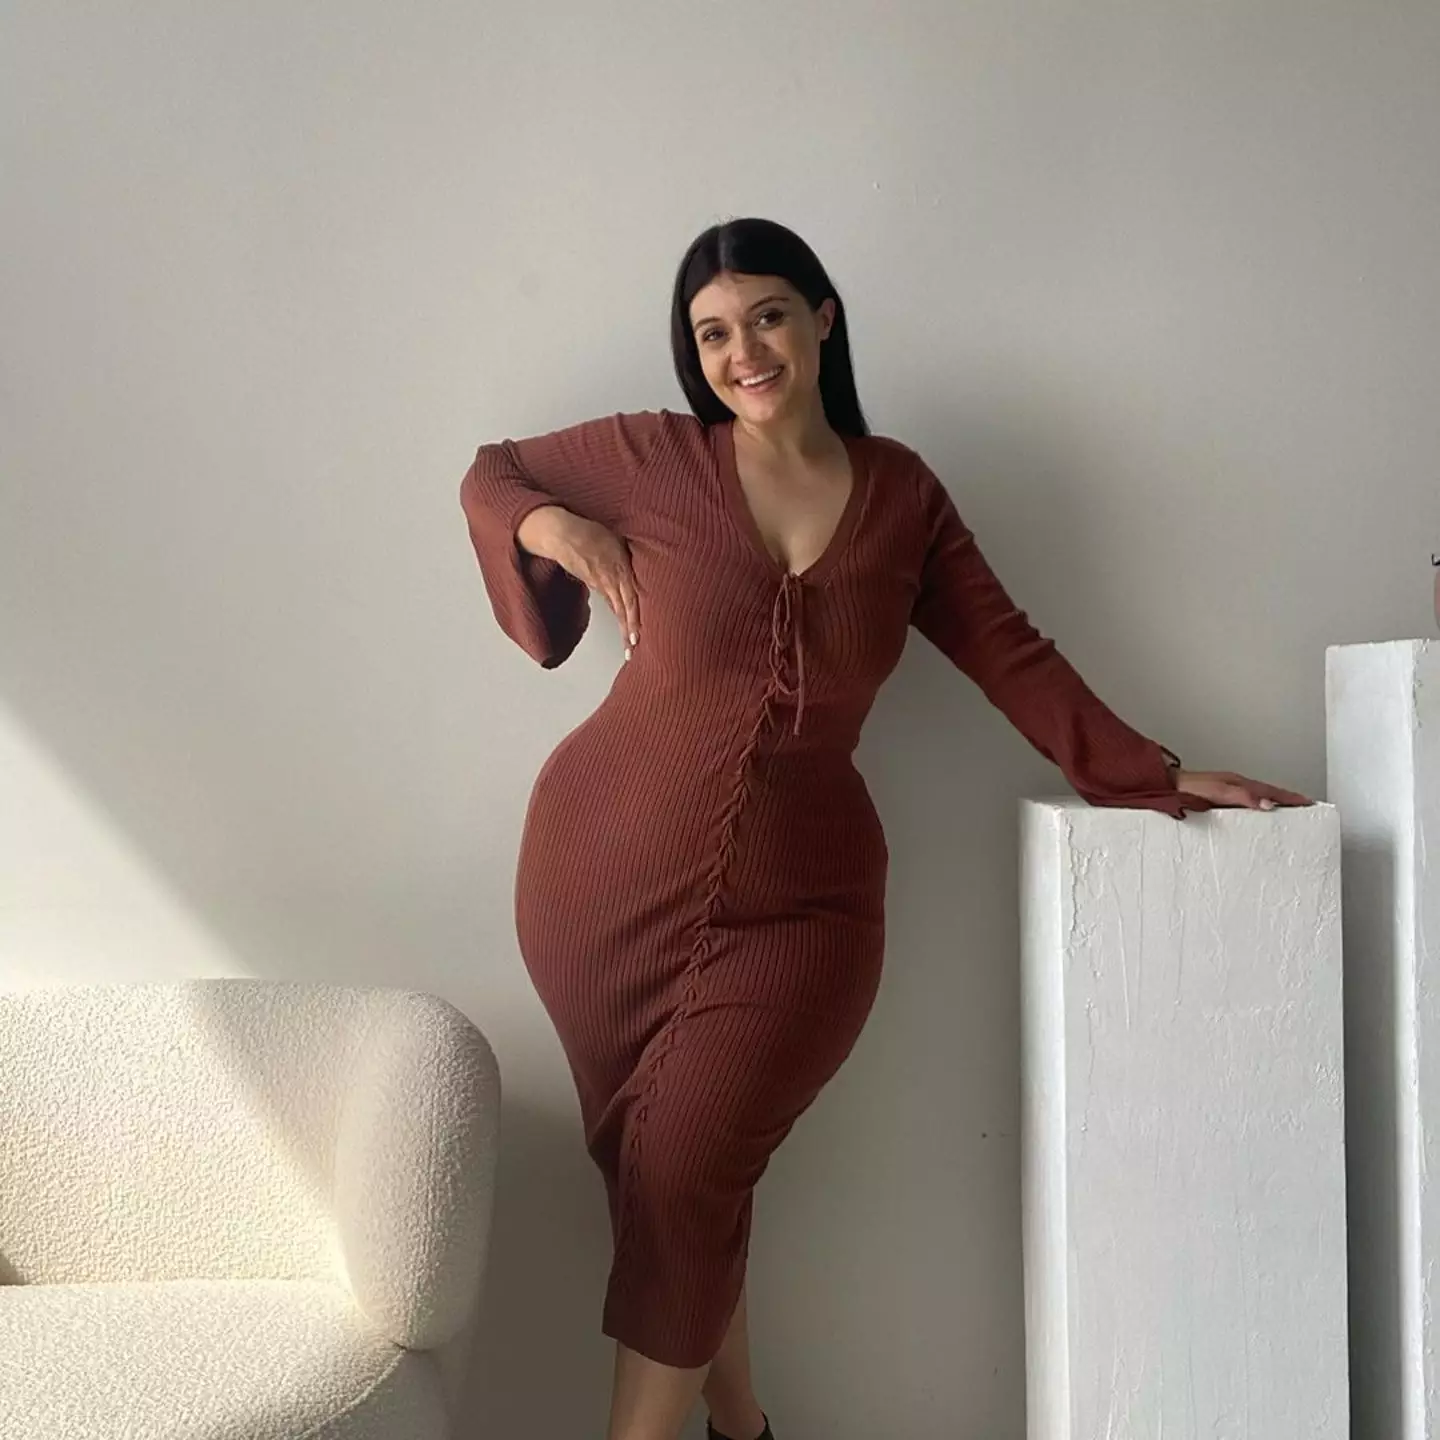 The influencer spreads awareness about lipedema after being diagnosed with the condition.